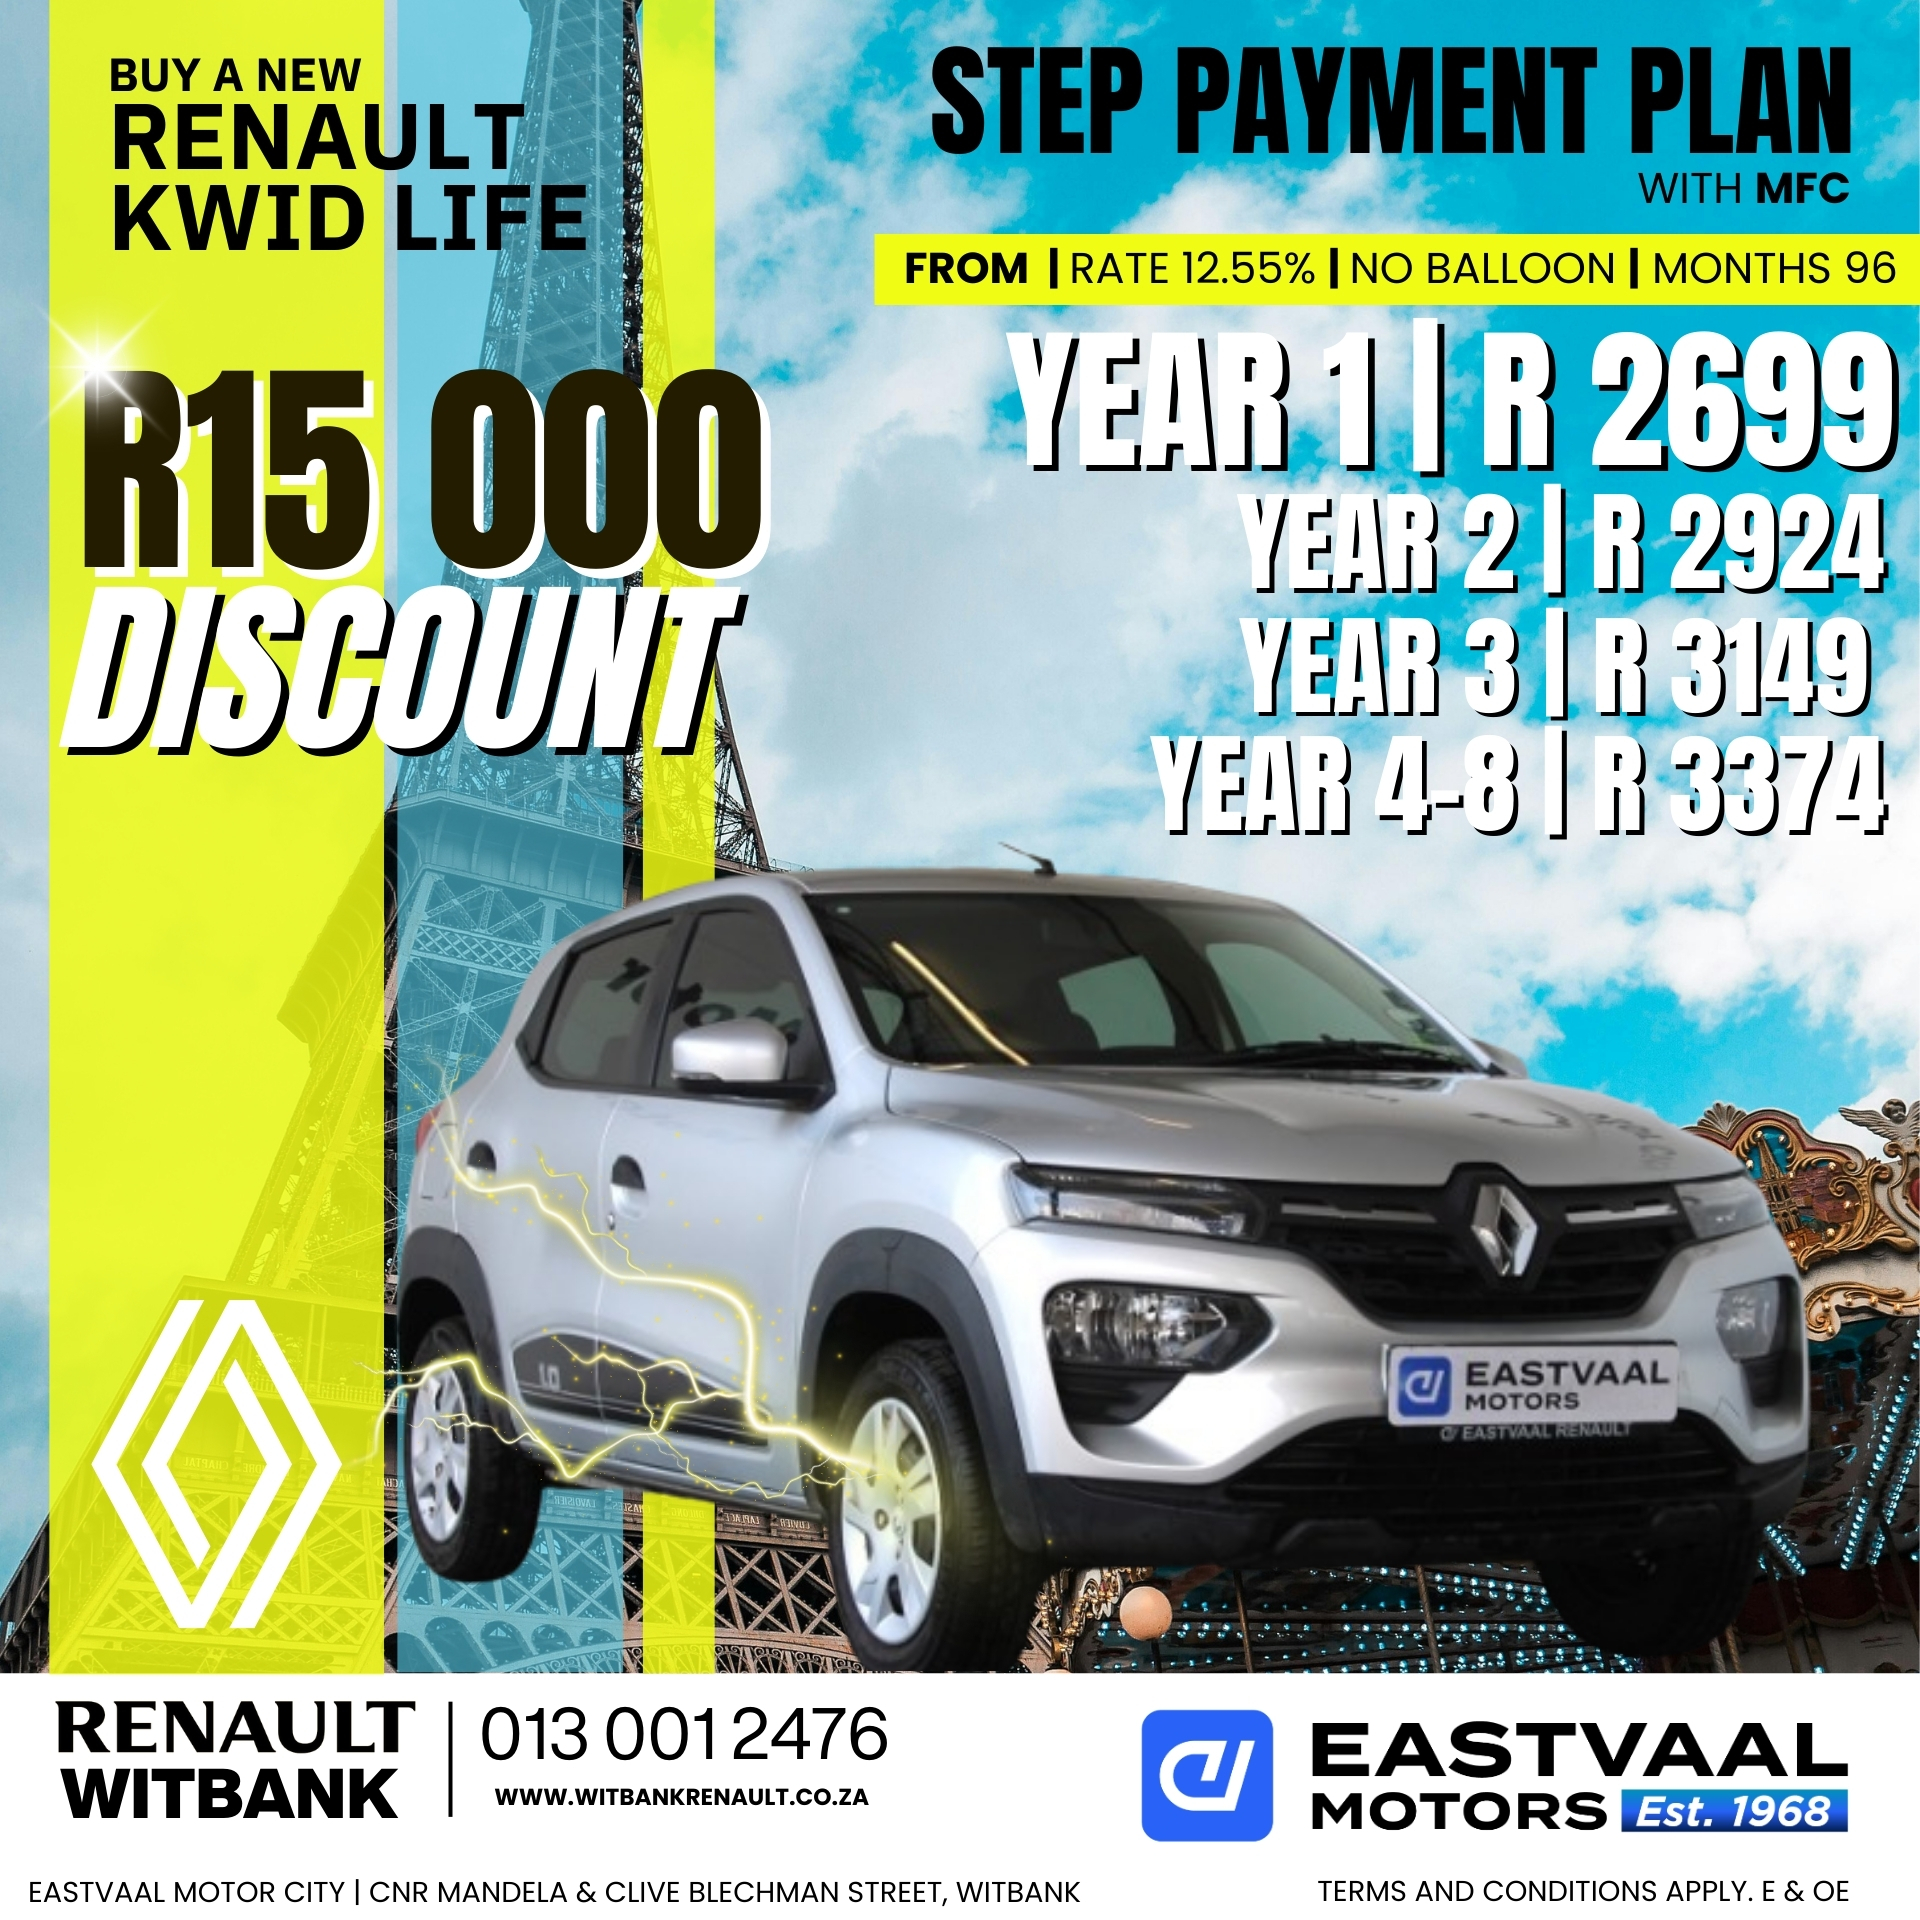 July is the perfect time to drive away in a new Renault! image from 